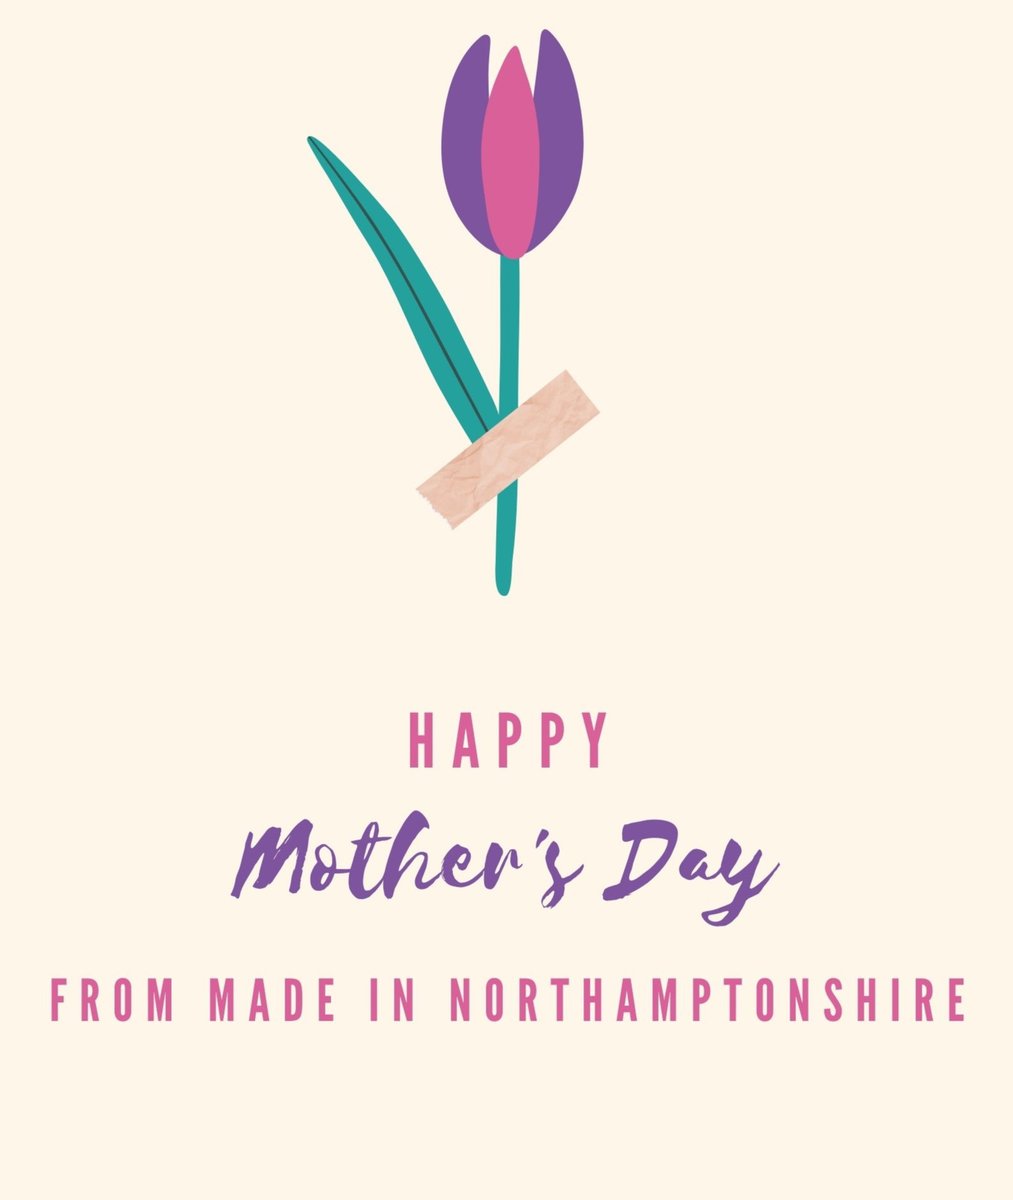 Happy Mother's Day from everyone at Made In Northamptonshire!! 😀🌷💗